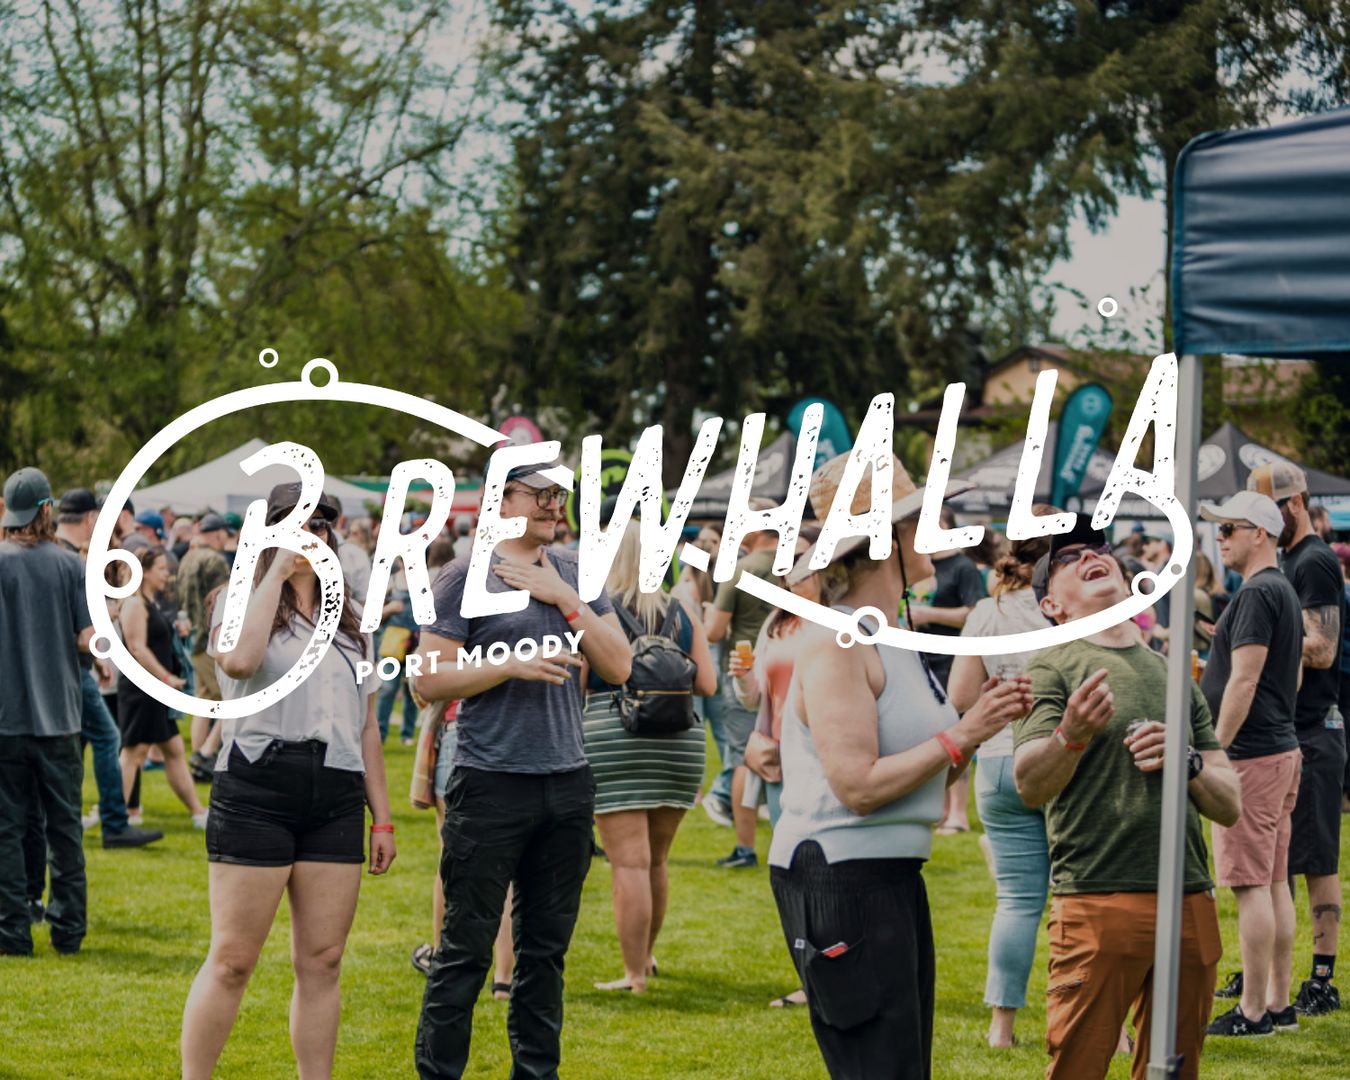 Brewhalla Beer and Music Festival, Port Moody, British Columbia, Canada